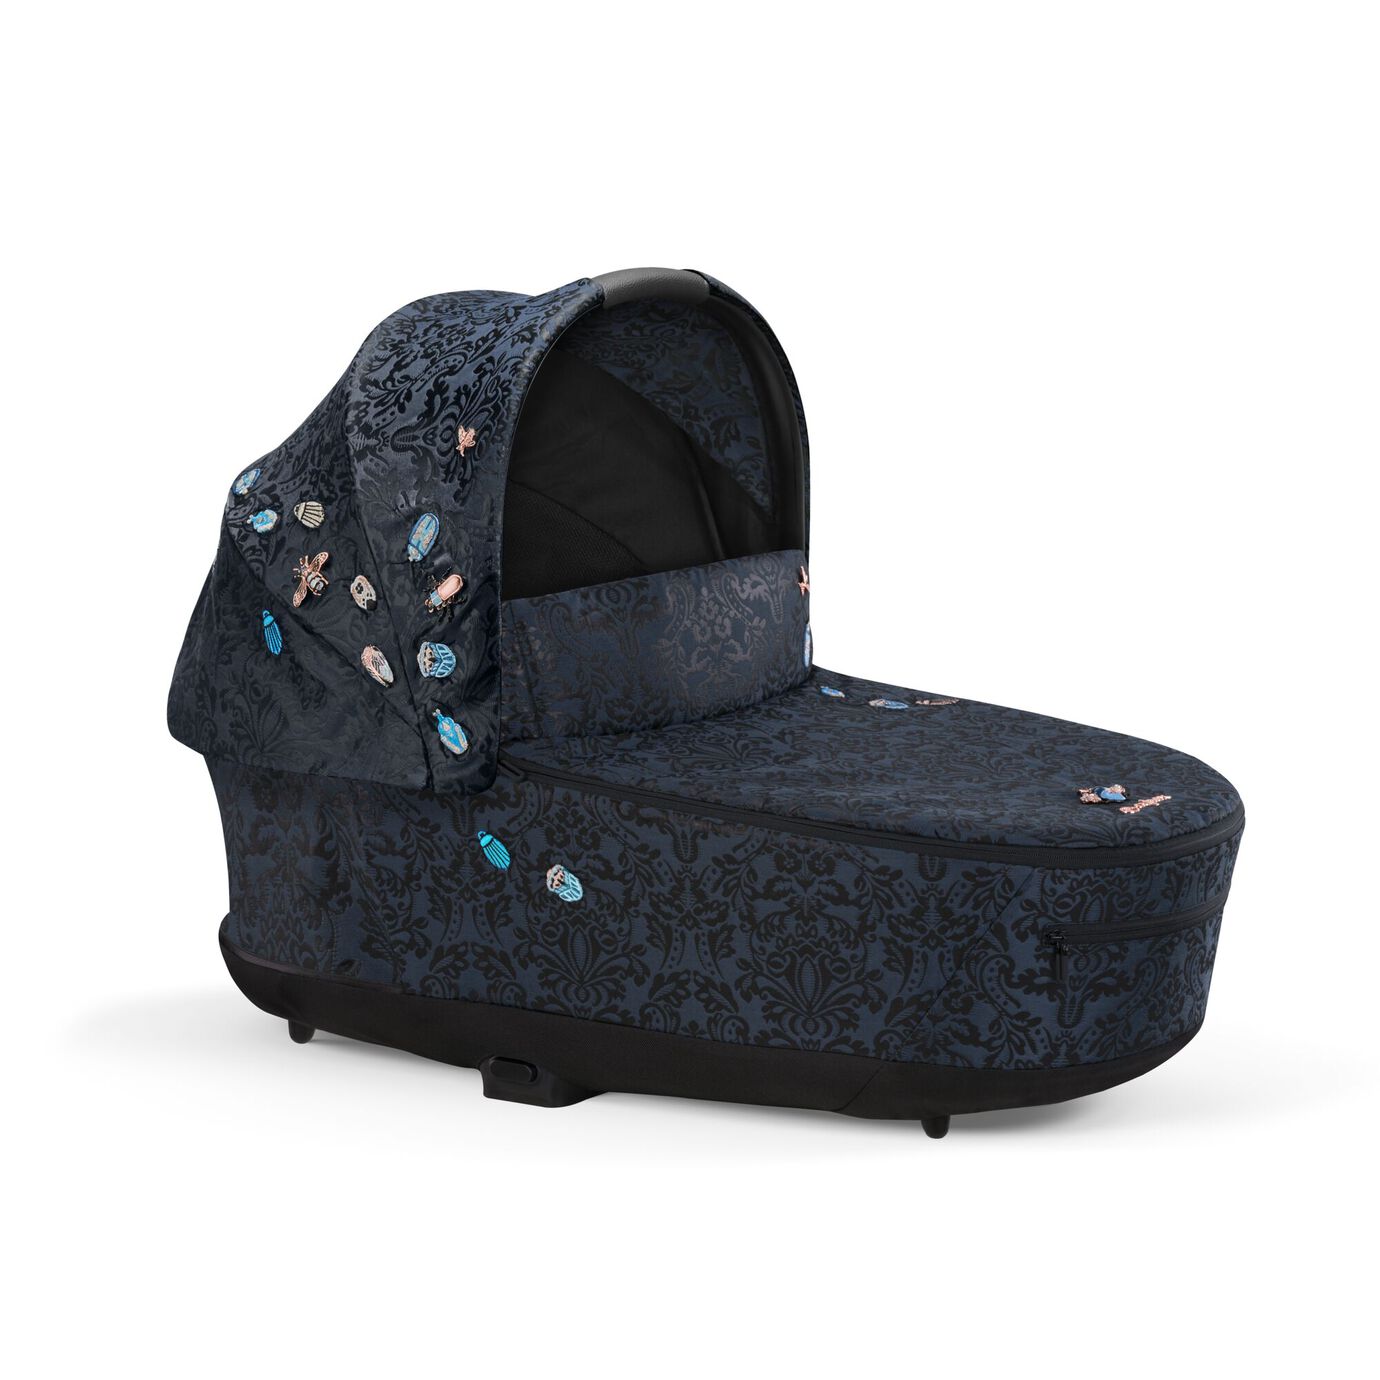 cyb_21_int_y315_jewelsofnature_priam_luxcarrycot_jena_17d7f21ce91c7270